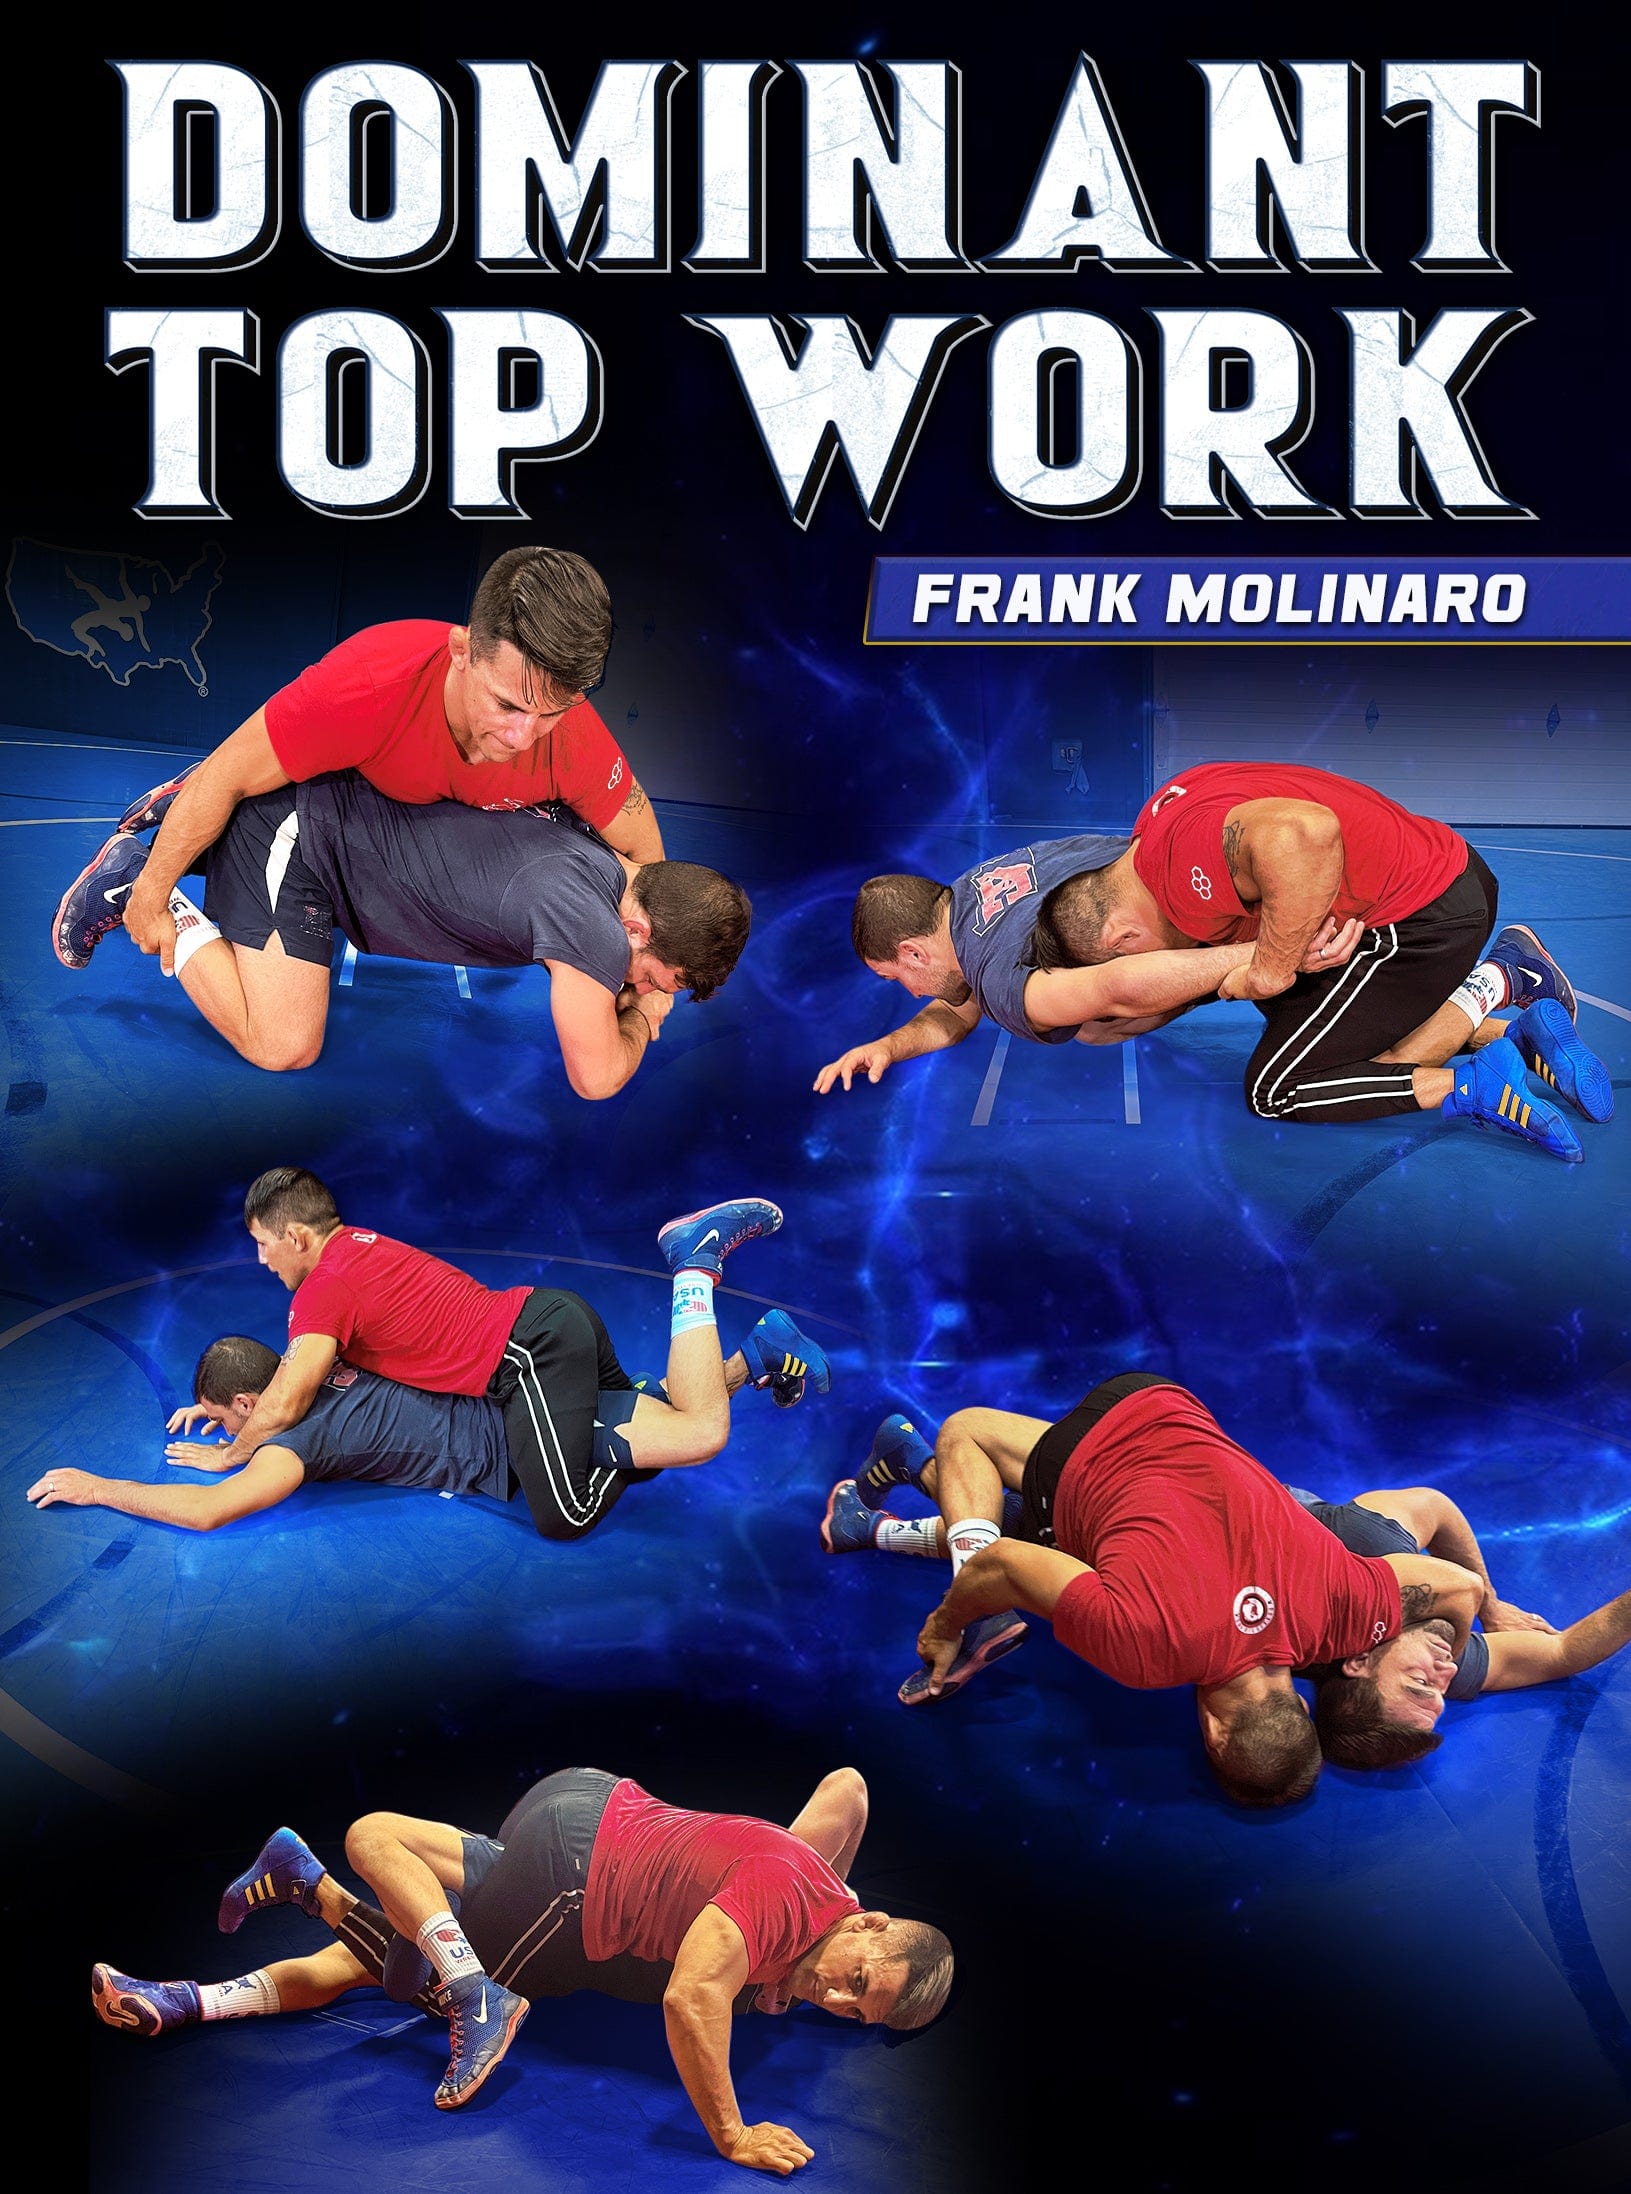 Dominant top Work by Frank Molinaro - Fanatic Wrestling